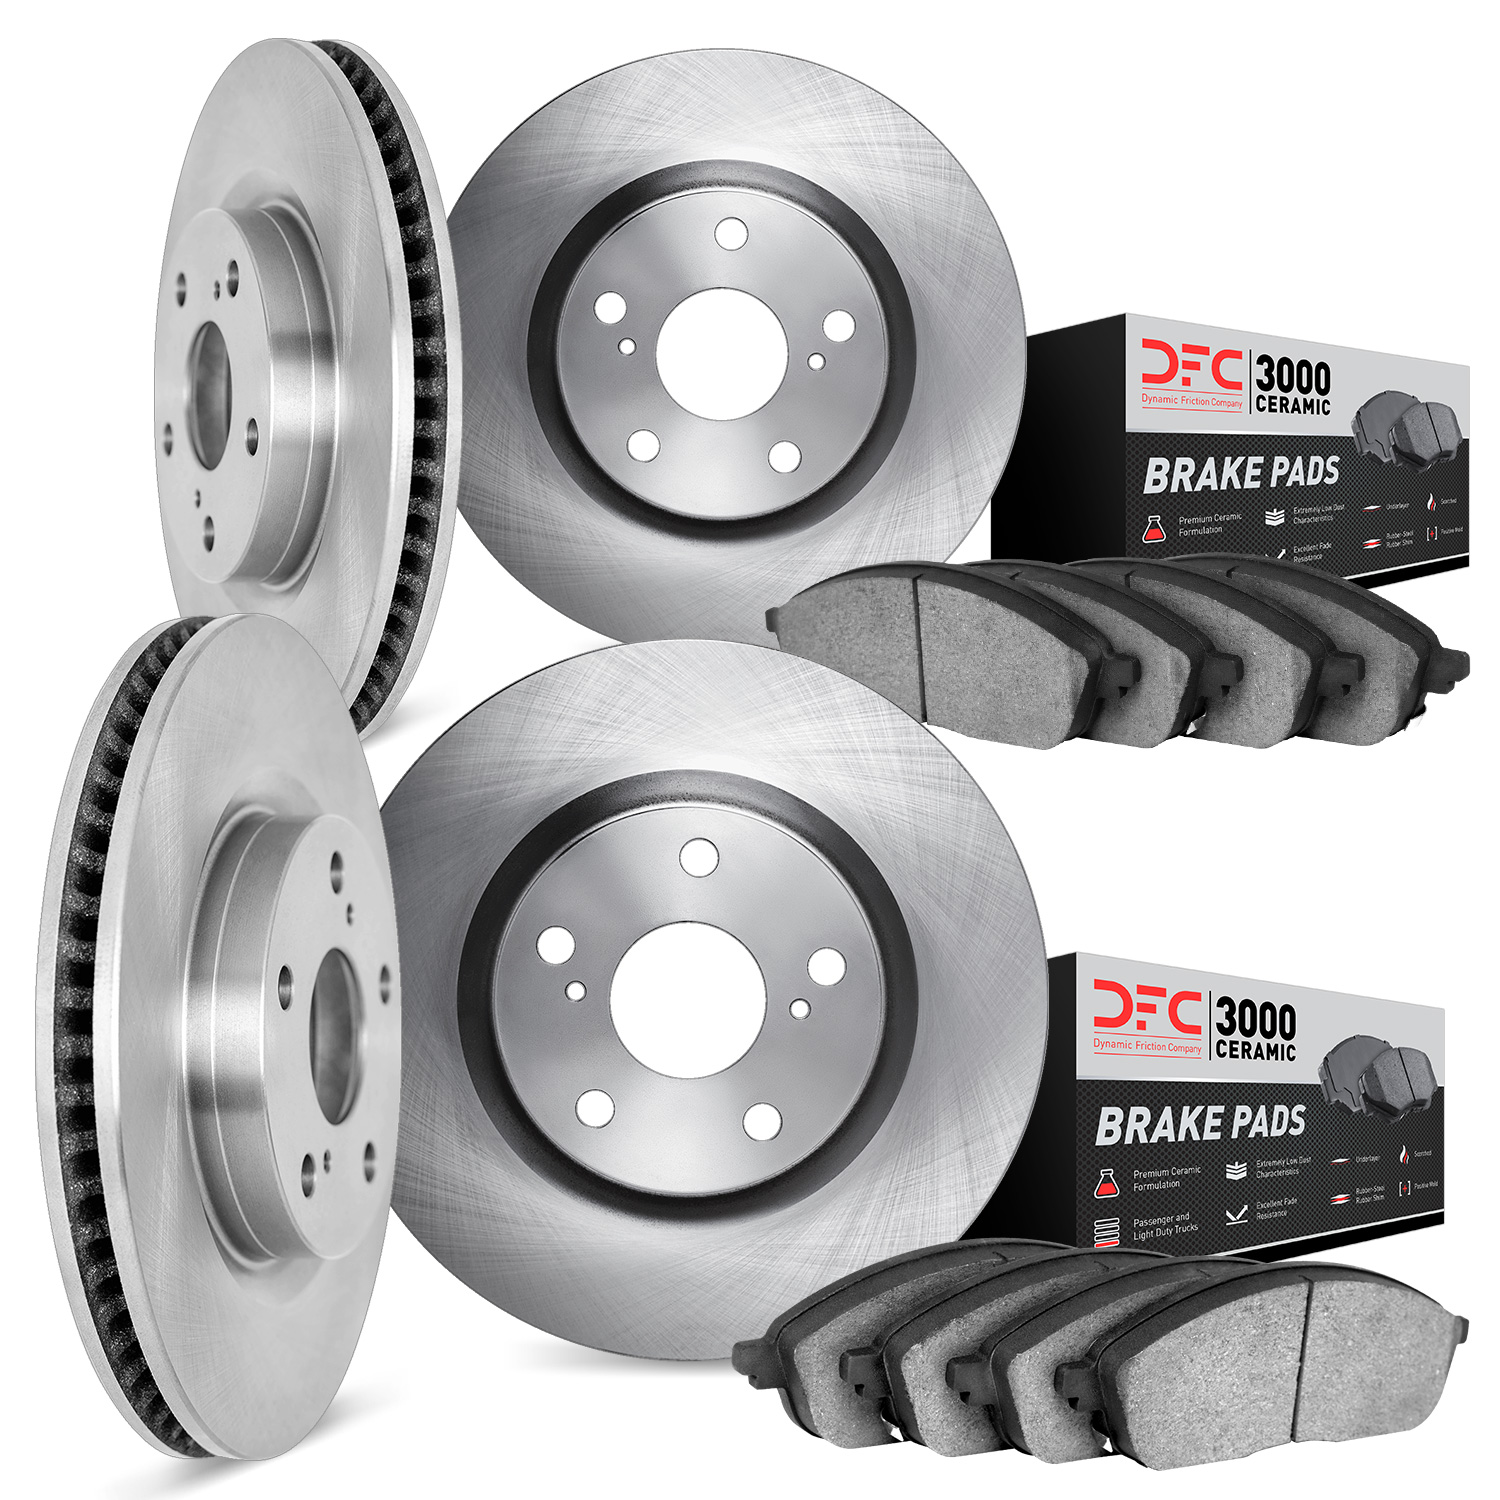 6304-75006 Brake Rotors with 3000-Series Ceramic Brake Pads Kit, 1993-1997 Lexus/Toyota/Scion, Position: Front and Rear